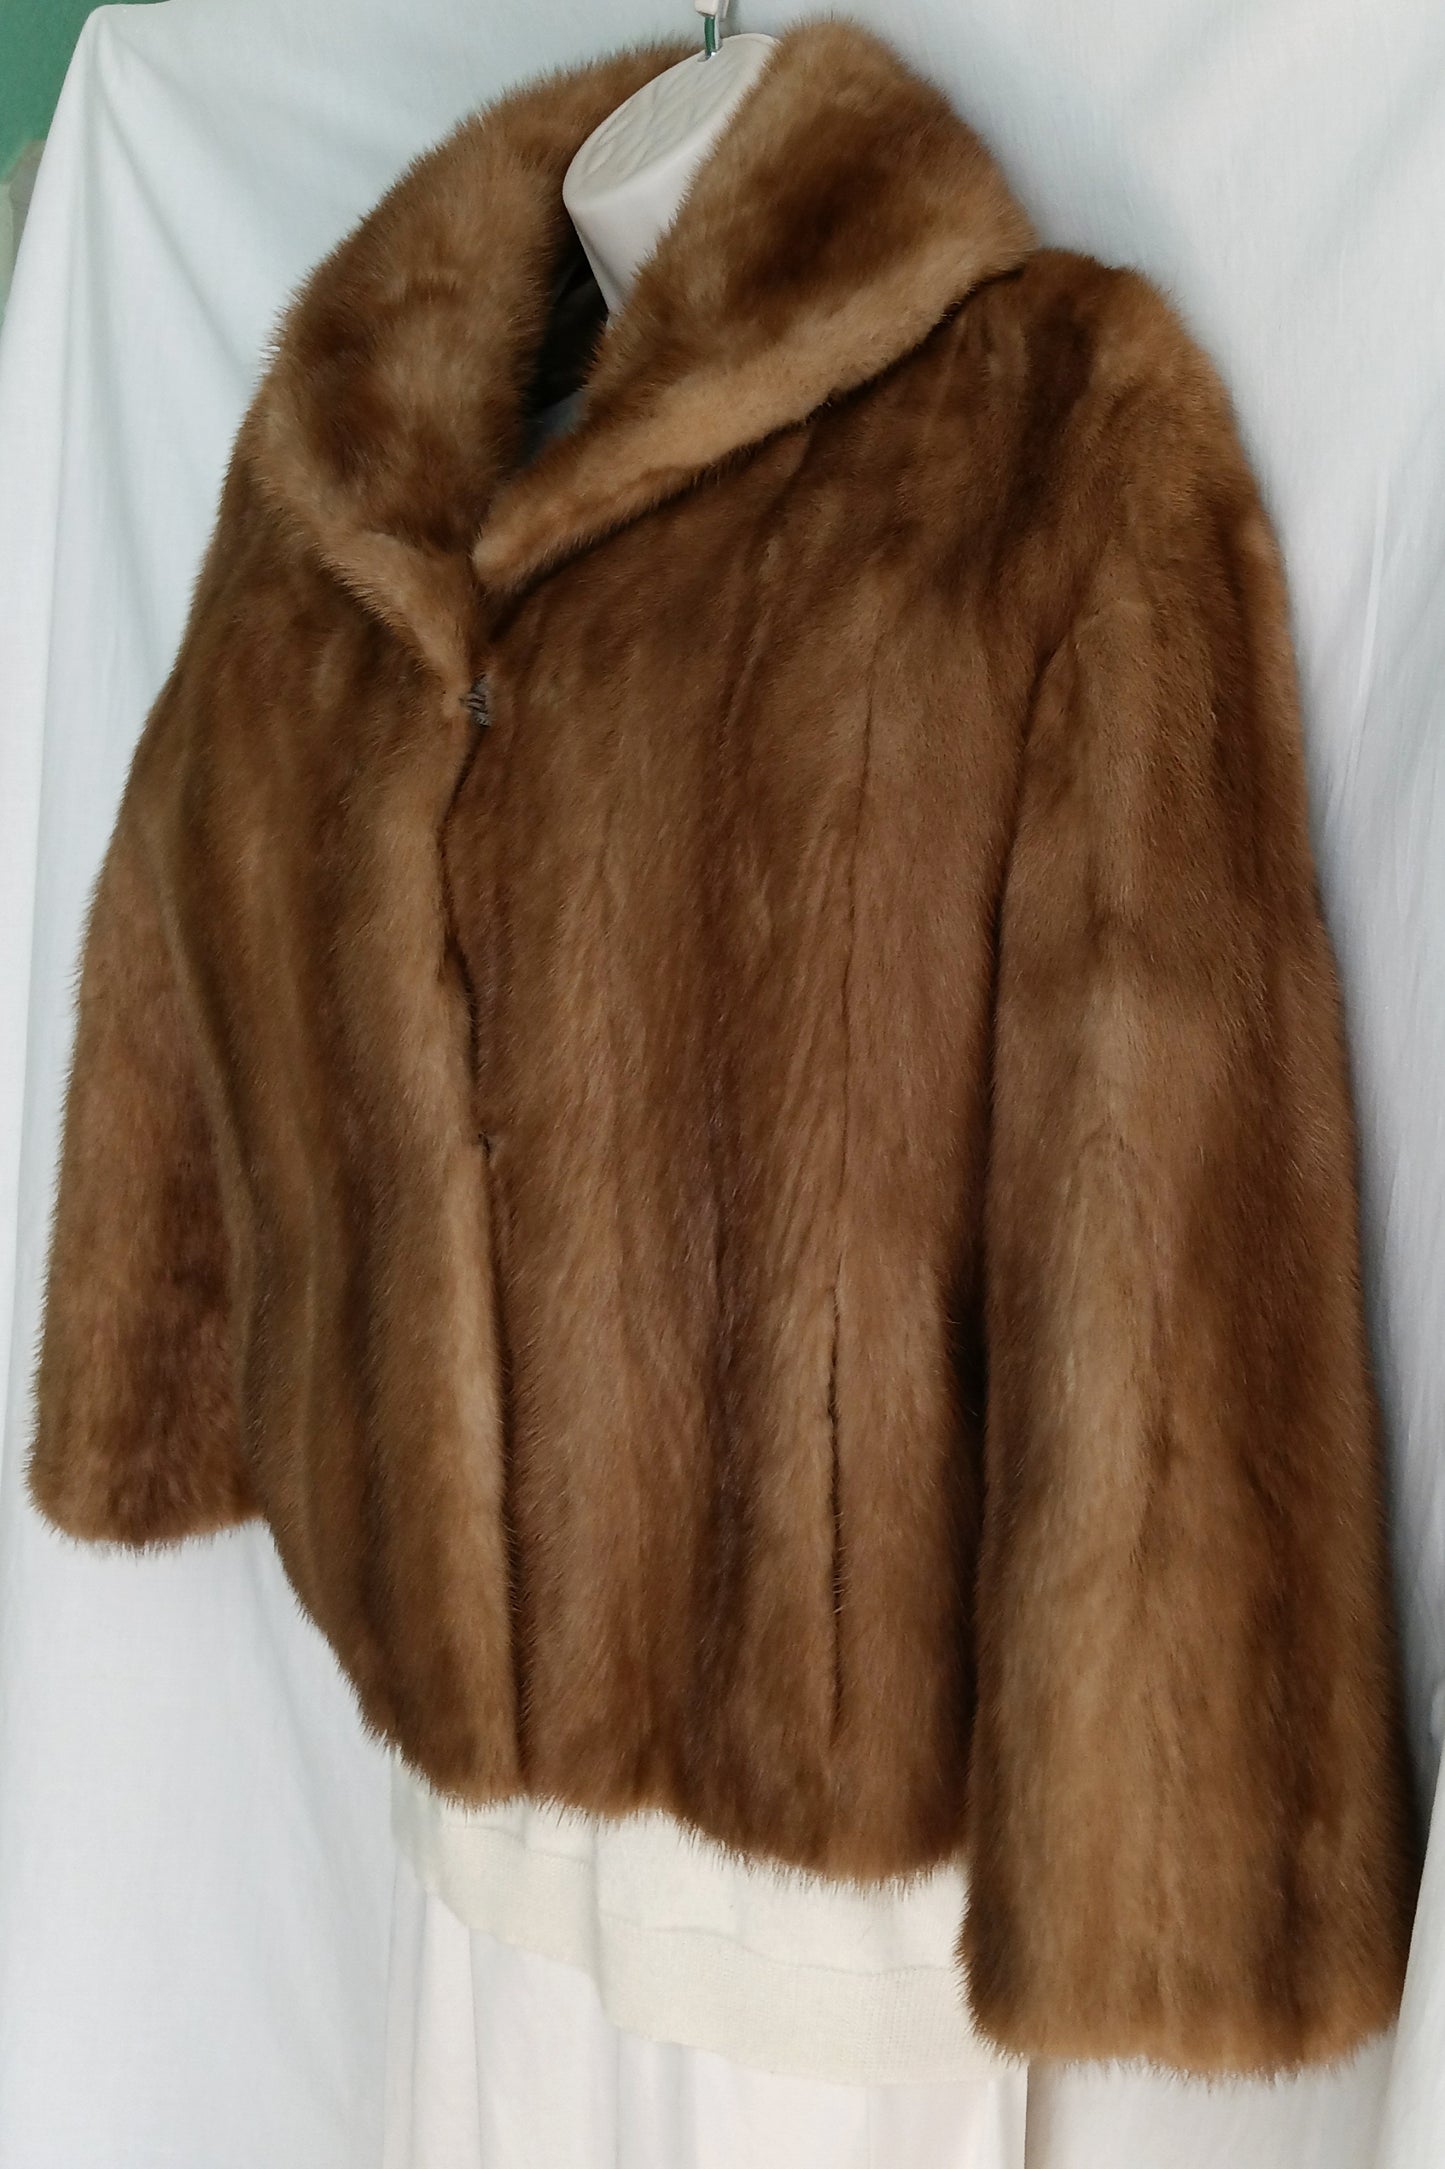 Vintage Beige Light Brown Mink Fur Jacket Classic- Special Occasion- Winter Holiday Party Women Outerwear Size S-M